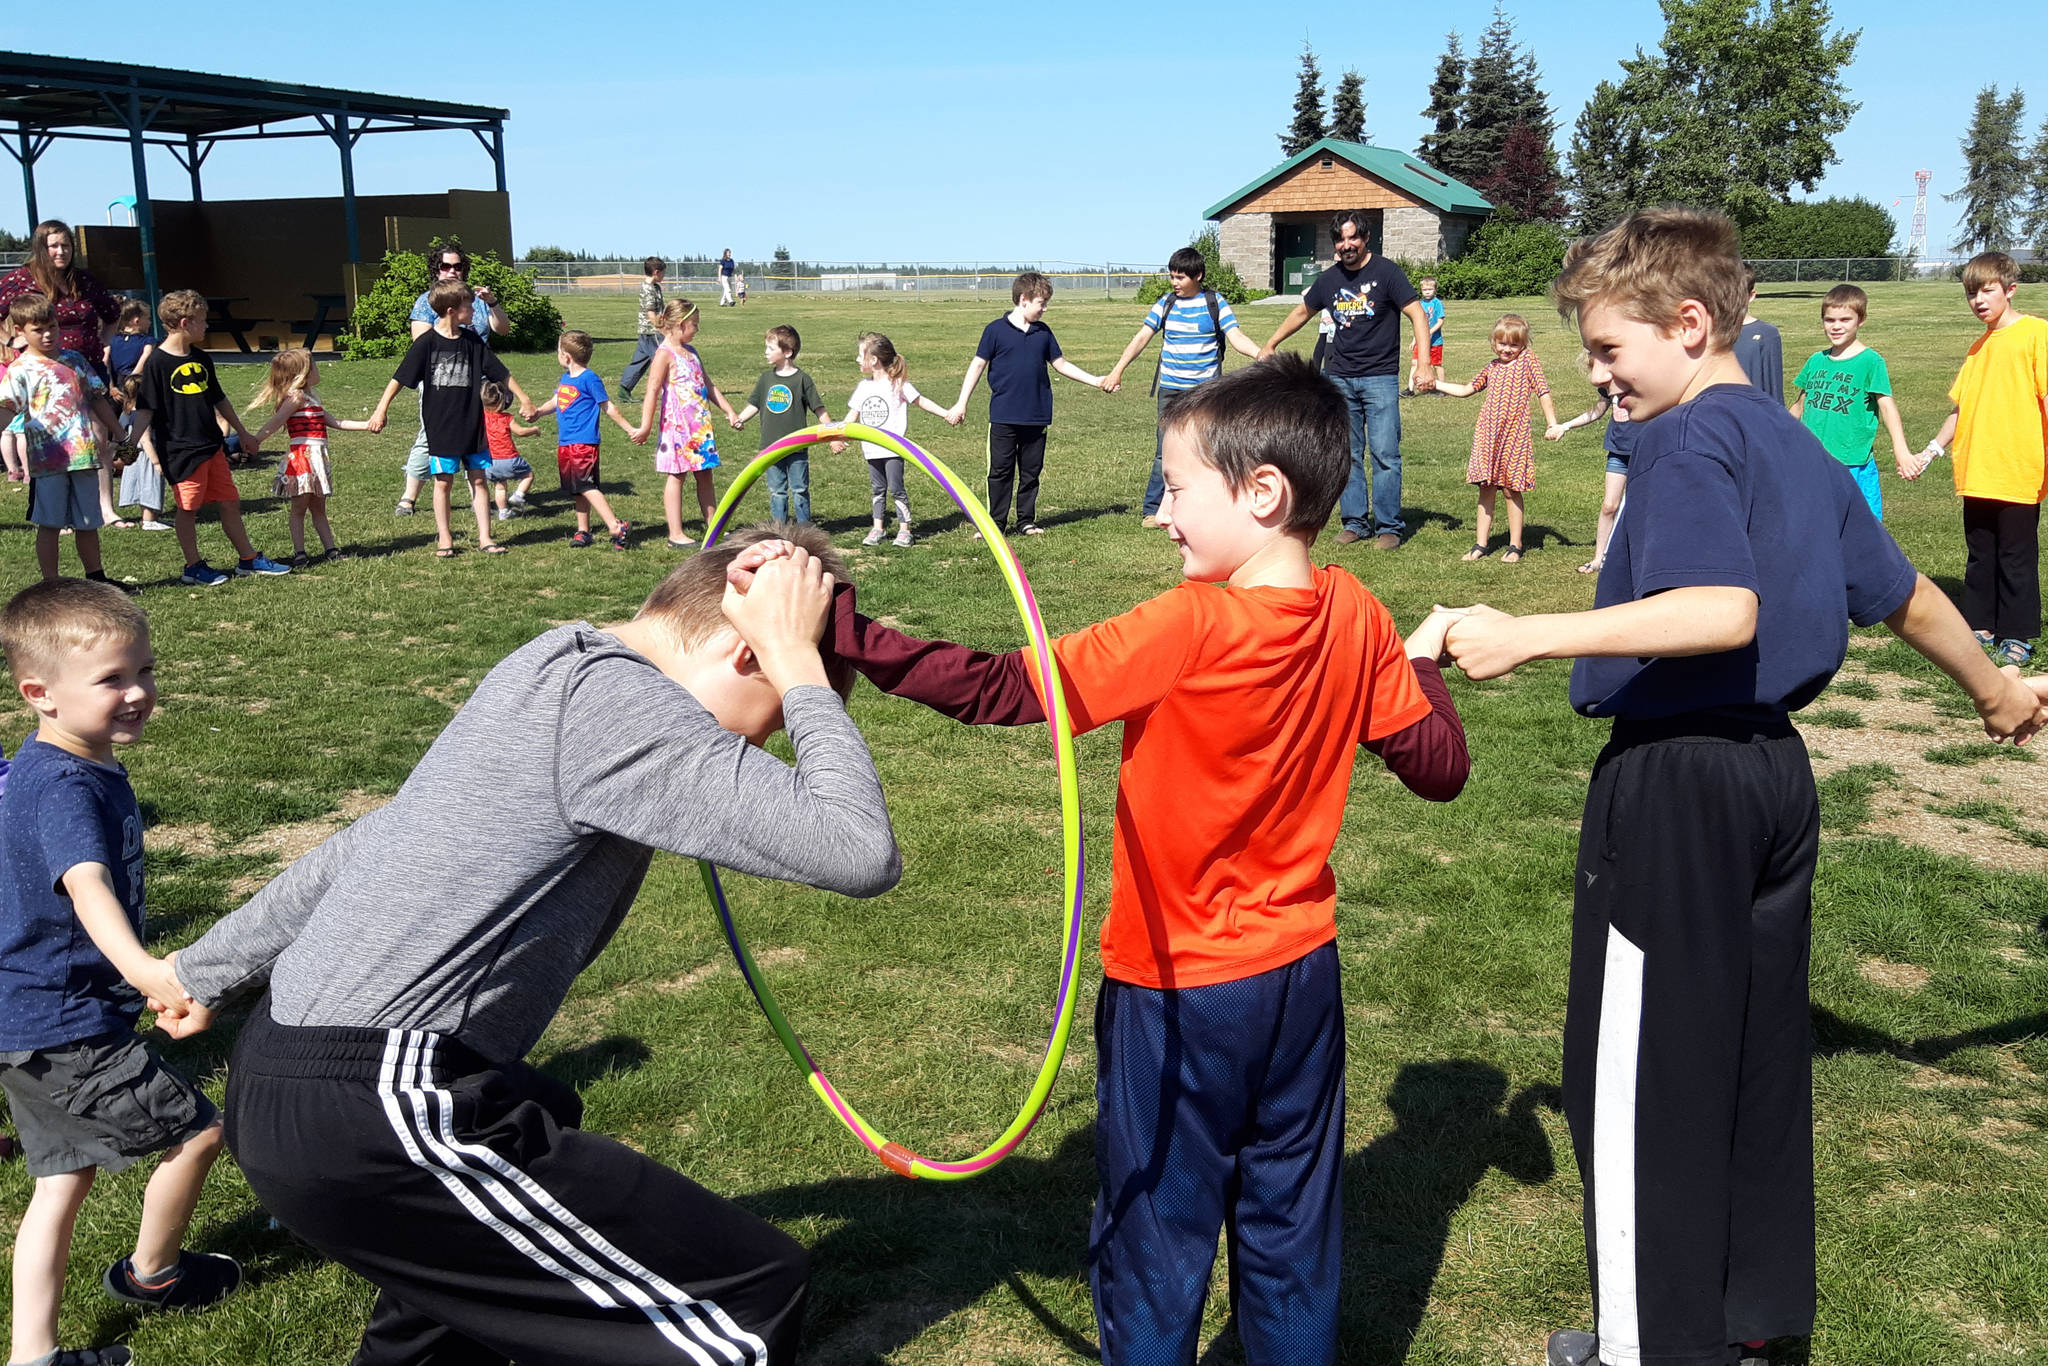 Kids attempt to travel through a “space portal”, also known as a hula hoop, during the last day of the Kenai Community Library’s summer reading program at the Kenai Park Strip on August 8, 2019. (Photo by Brian Mazurek/Peninsula Clarion)